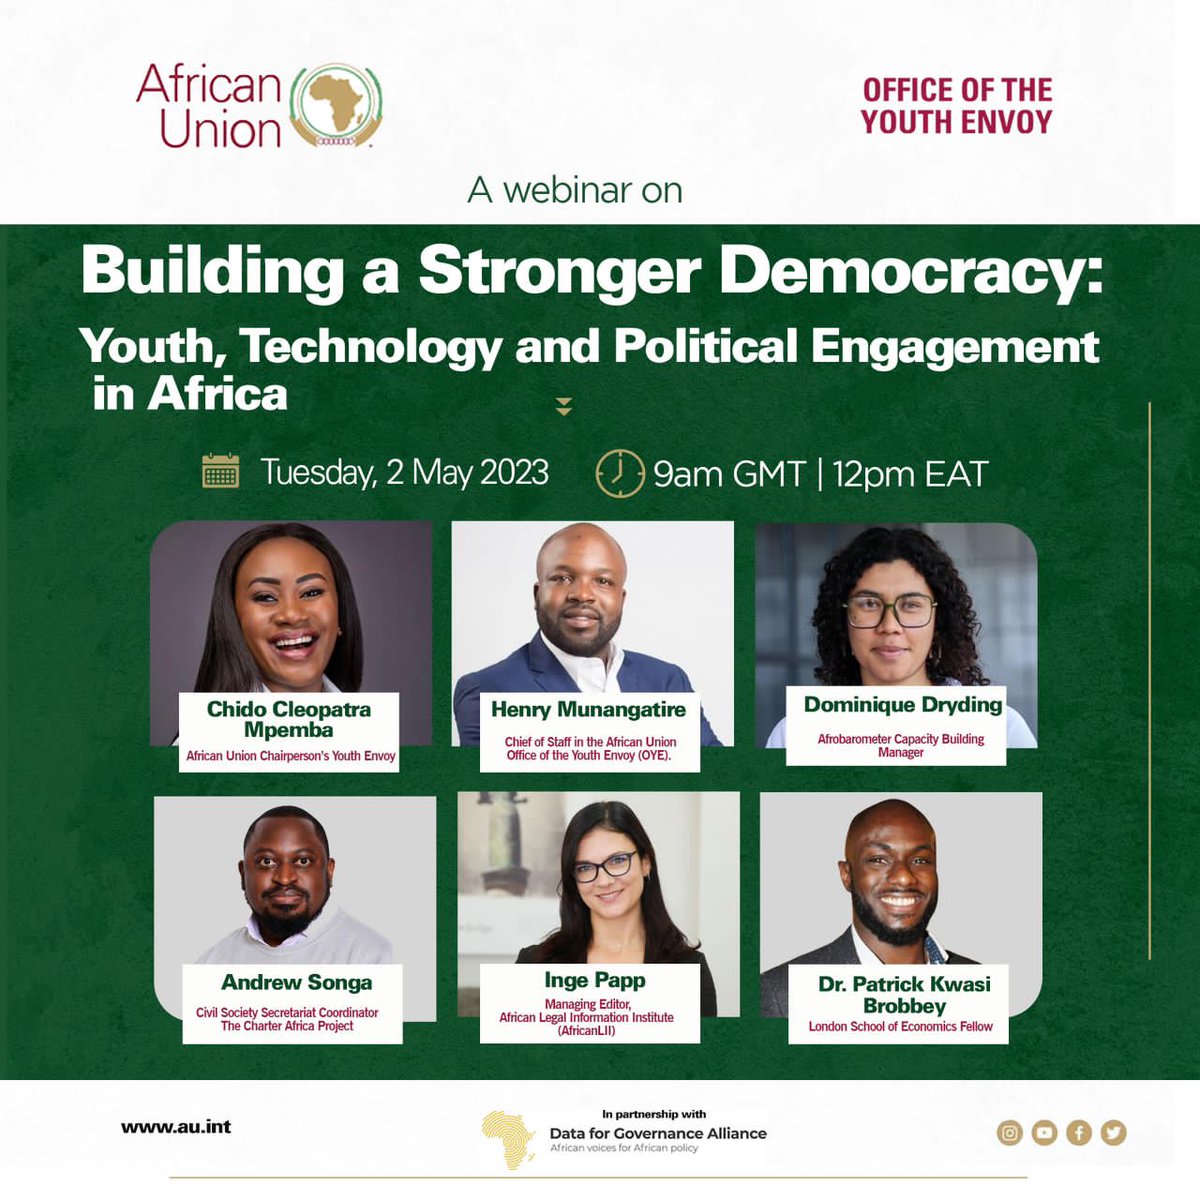 We're thrilled to announce the speakers for our joint webinar co-hosted by the offices of the @AU_YouthEnvoy & @Data4GovAfrica! Join the conversation around the role of technology in building stronger democracies in Africa. Register here: eventbrite.co.uk/e/building-a-s…

#Tech4Gov